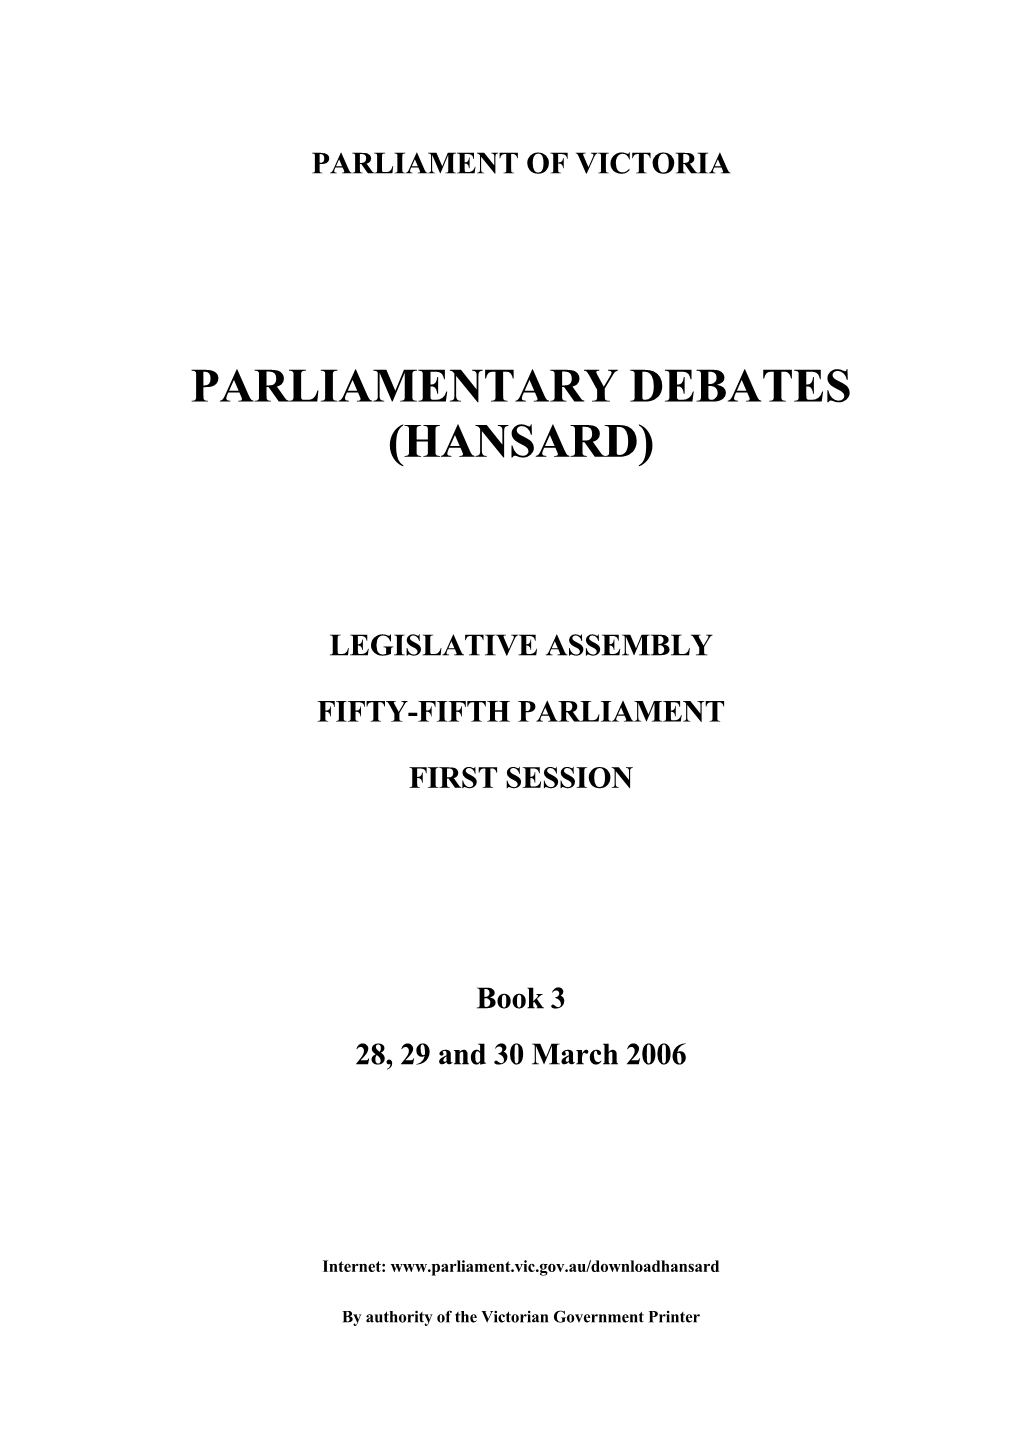 Book 3 28, 29 and 30 March 2006